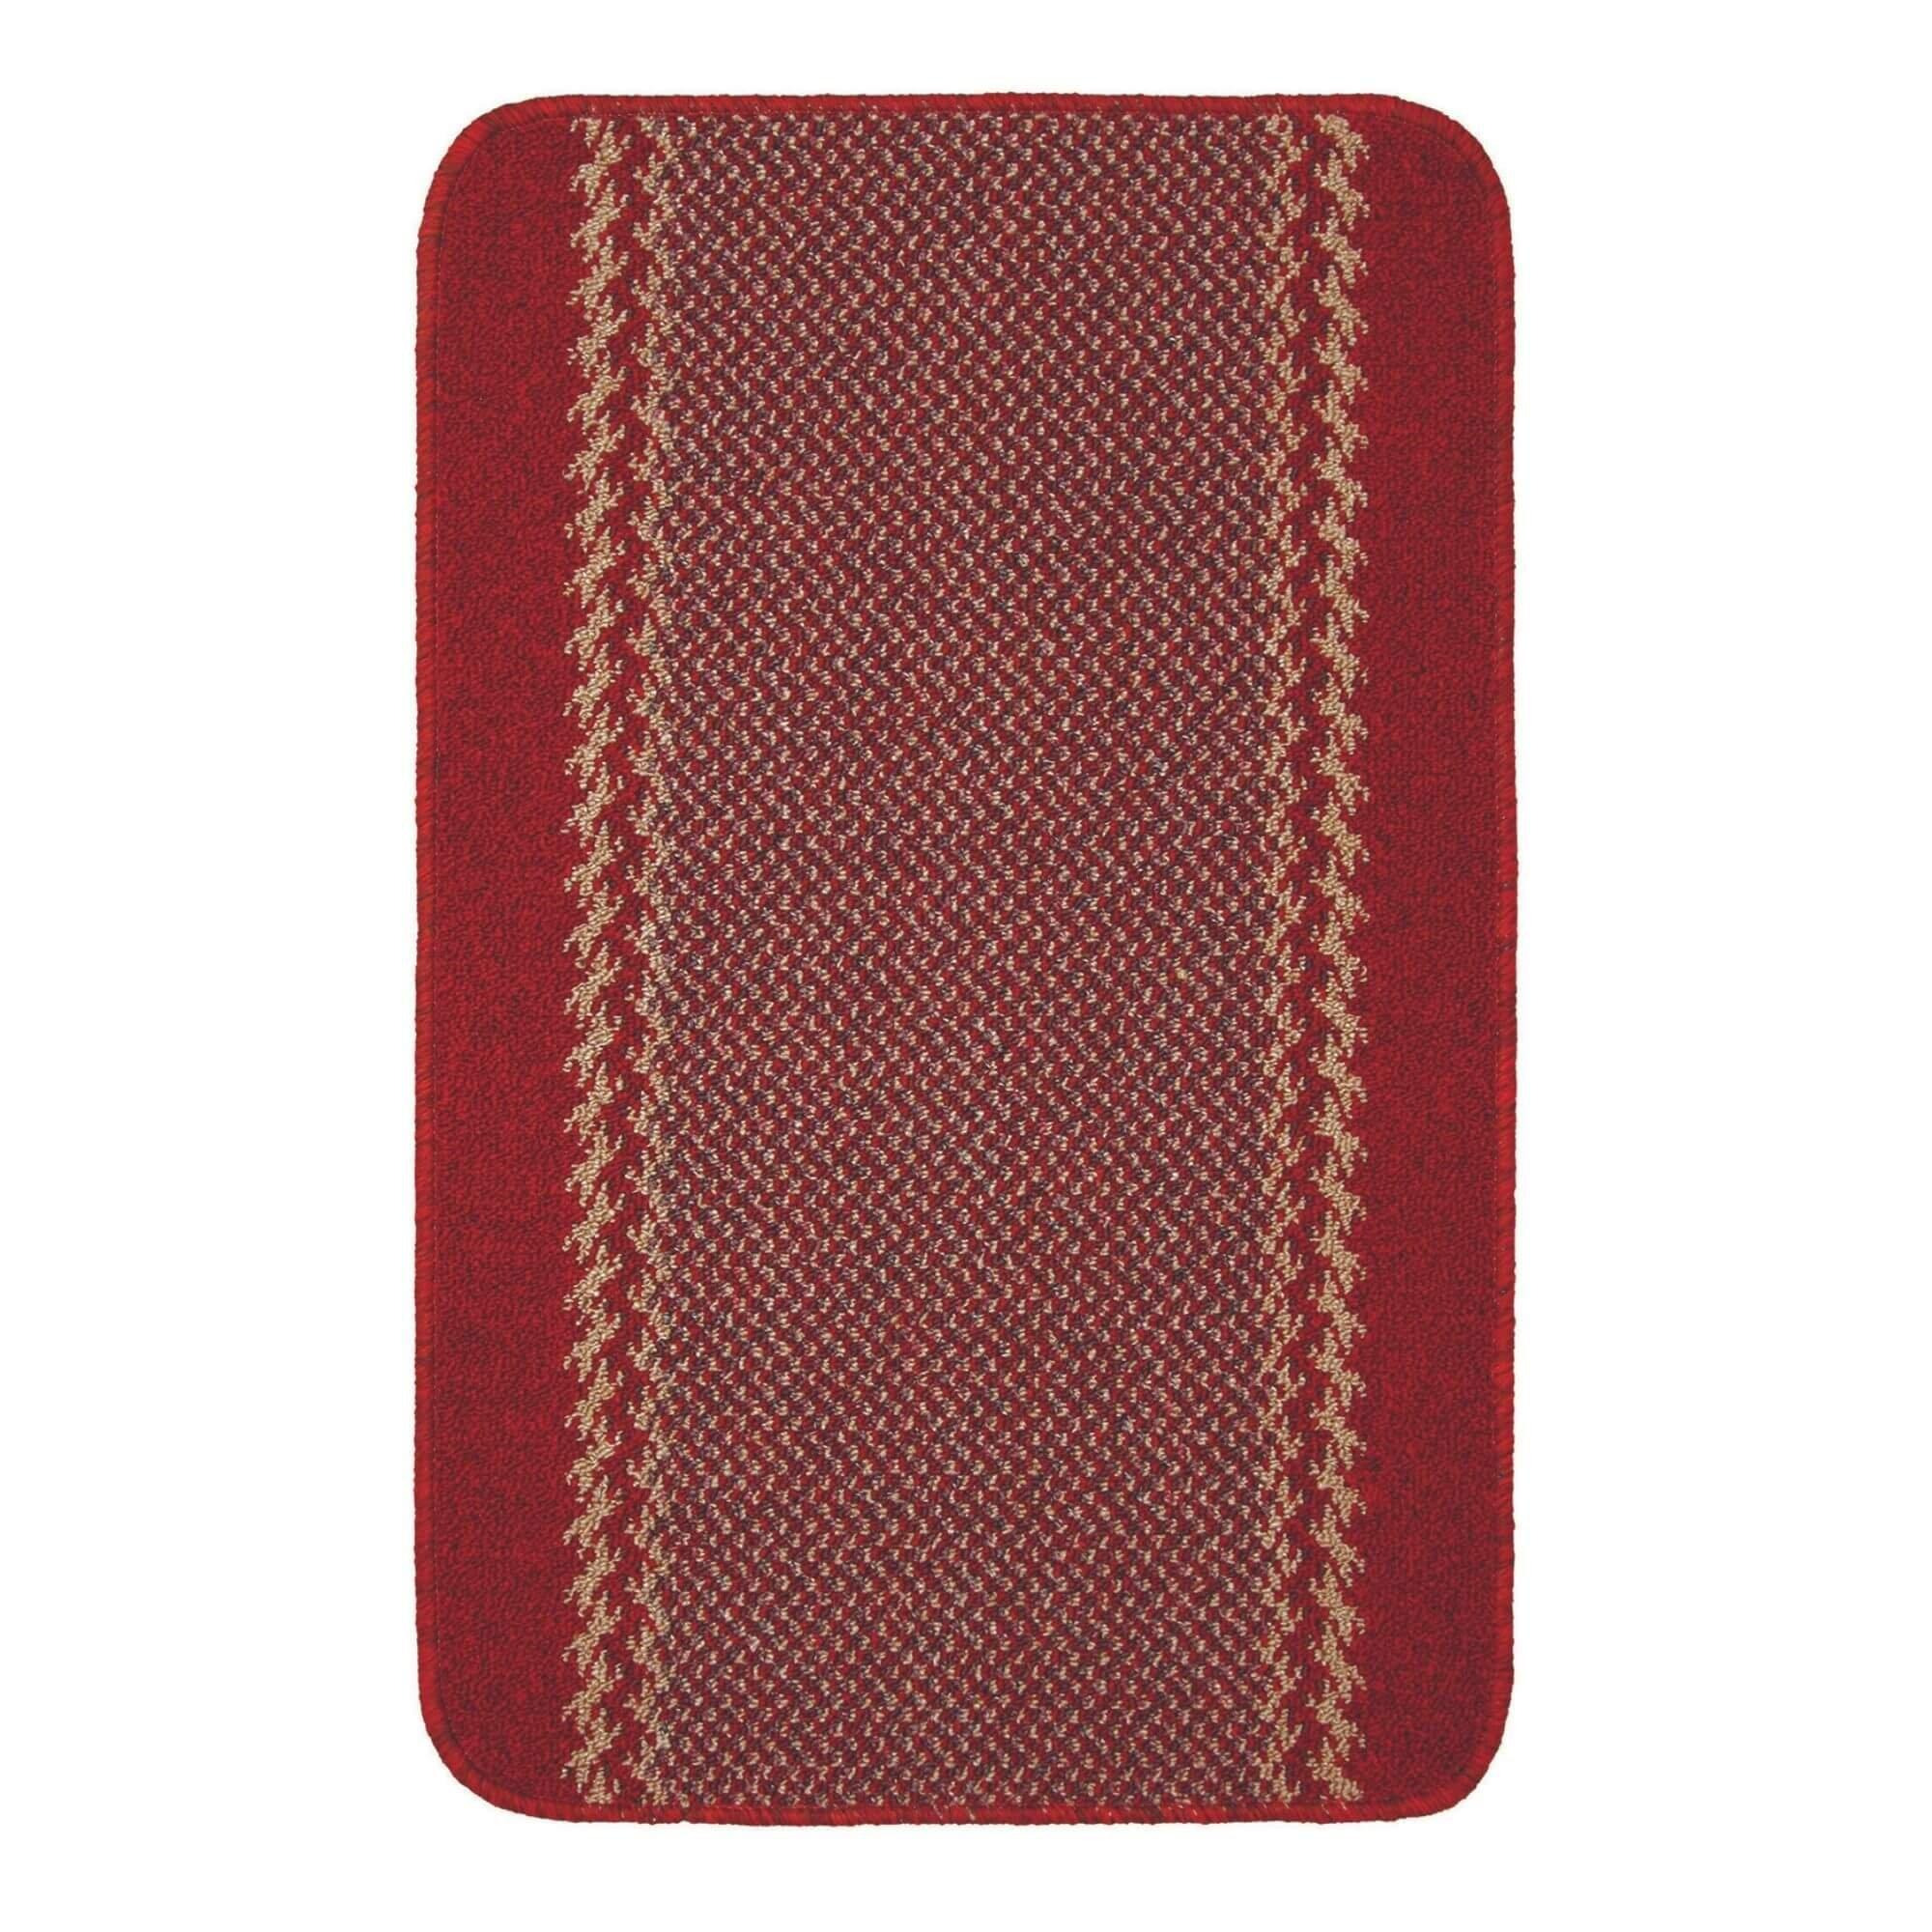 Washable Designer Rugs & Mats Lined Bordered Design in Red - 116R - image 1